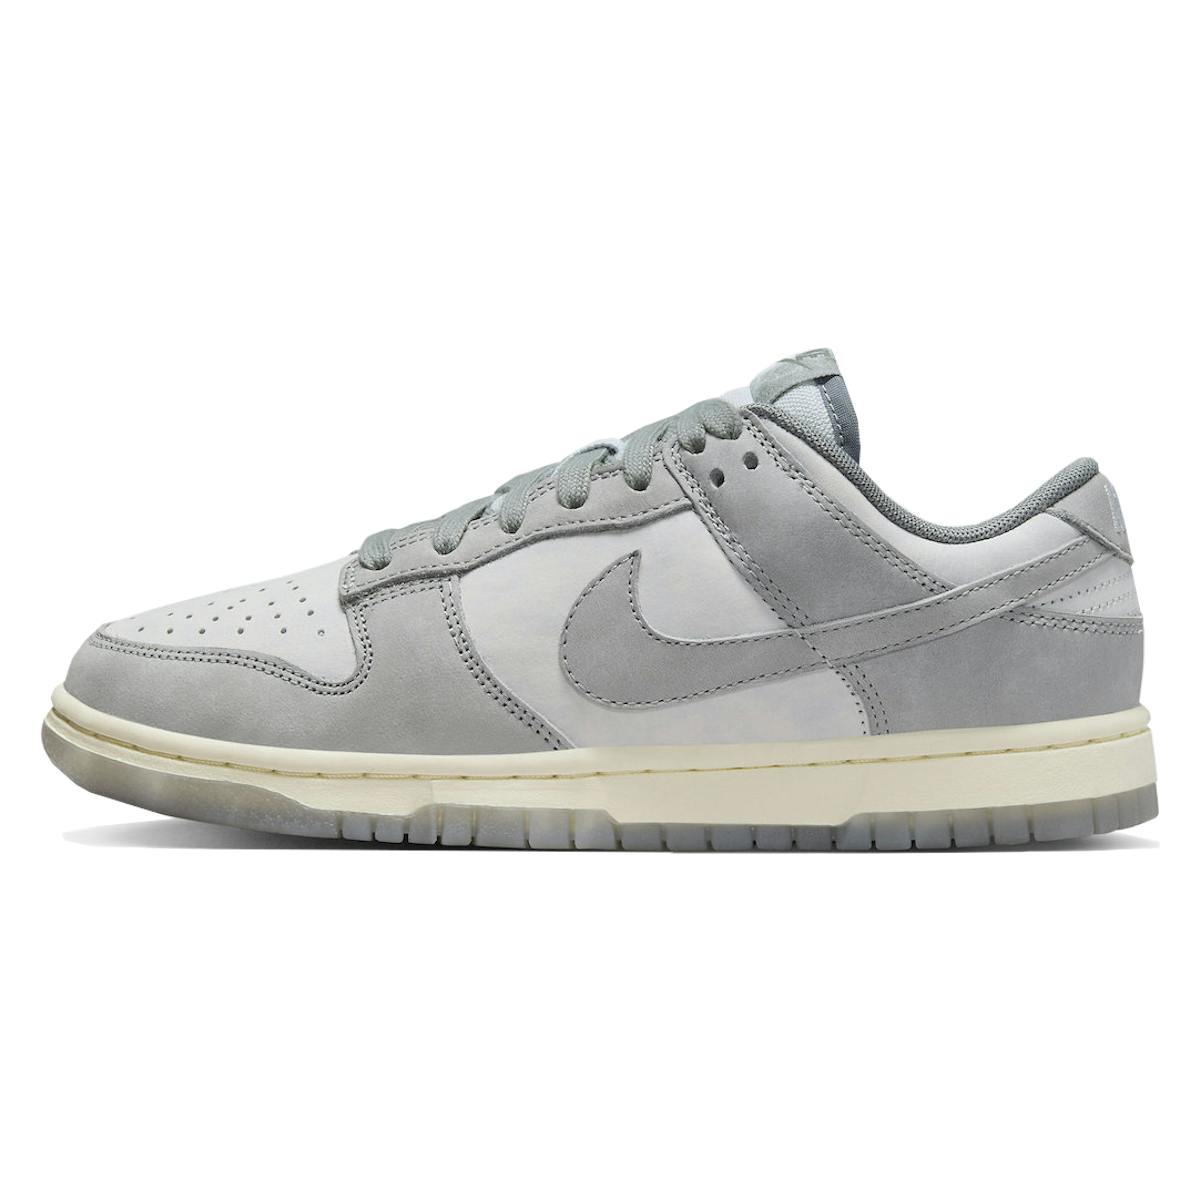 Nike Dunk Low Wmns "Cool Grey and Football Grey"